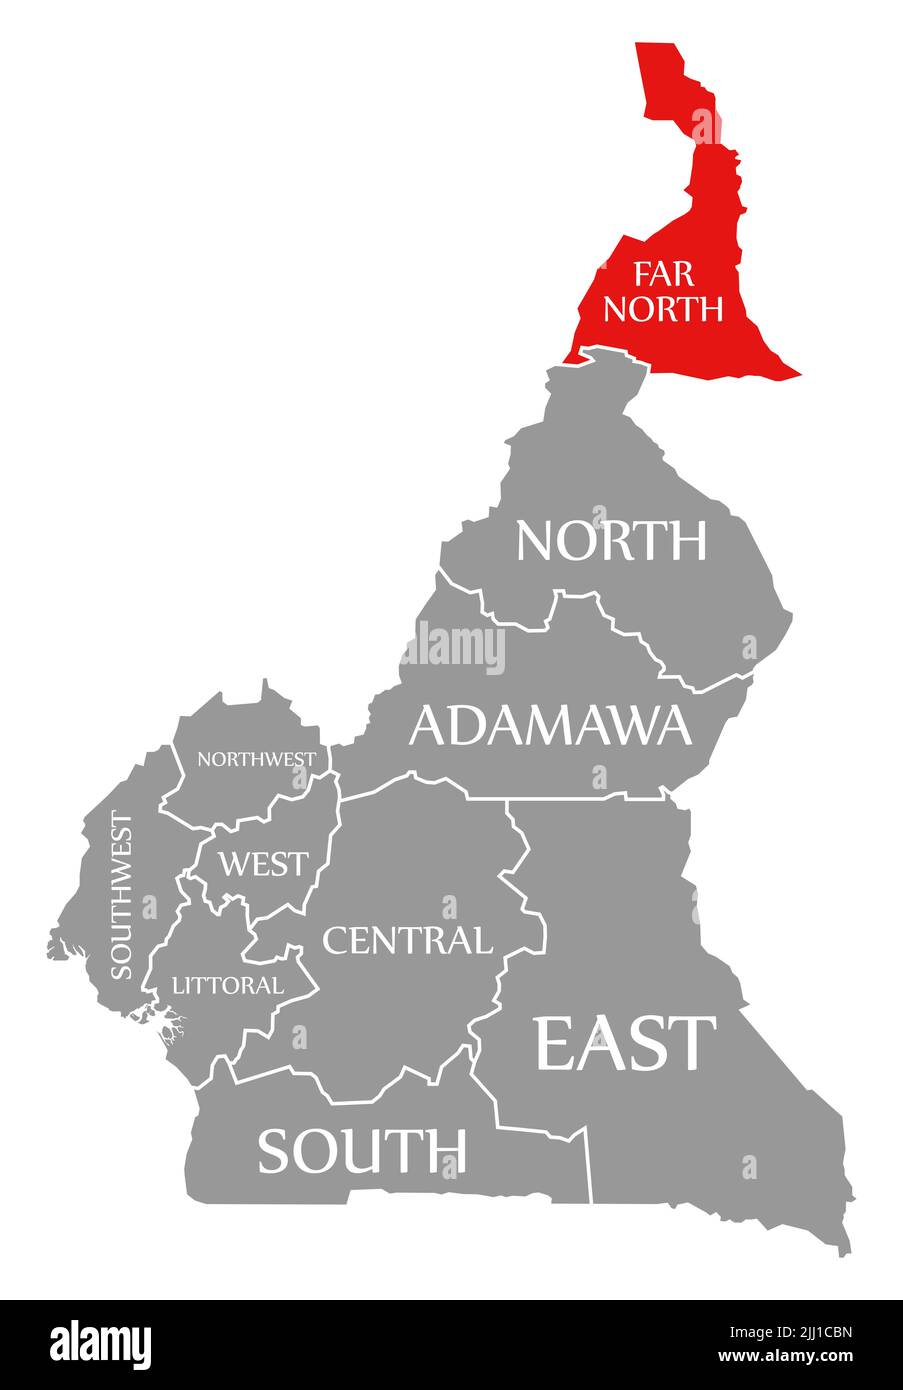 Far North region red highlighted in map of Cameroon Stock Photo